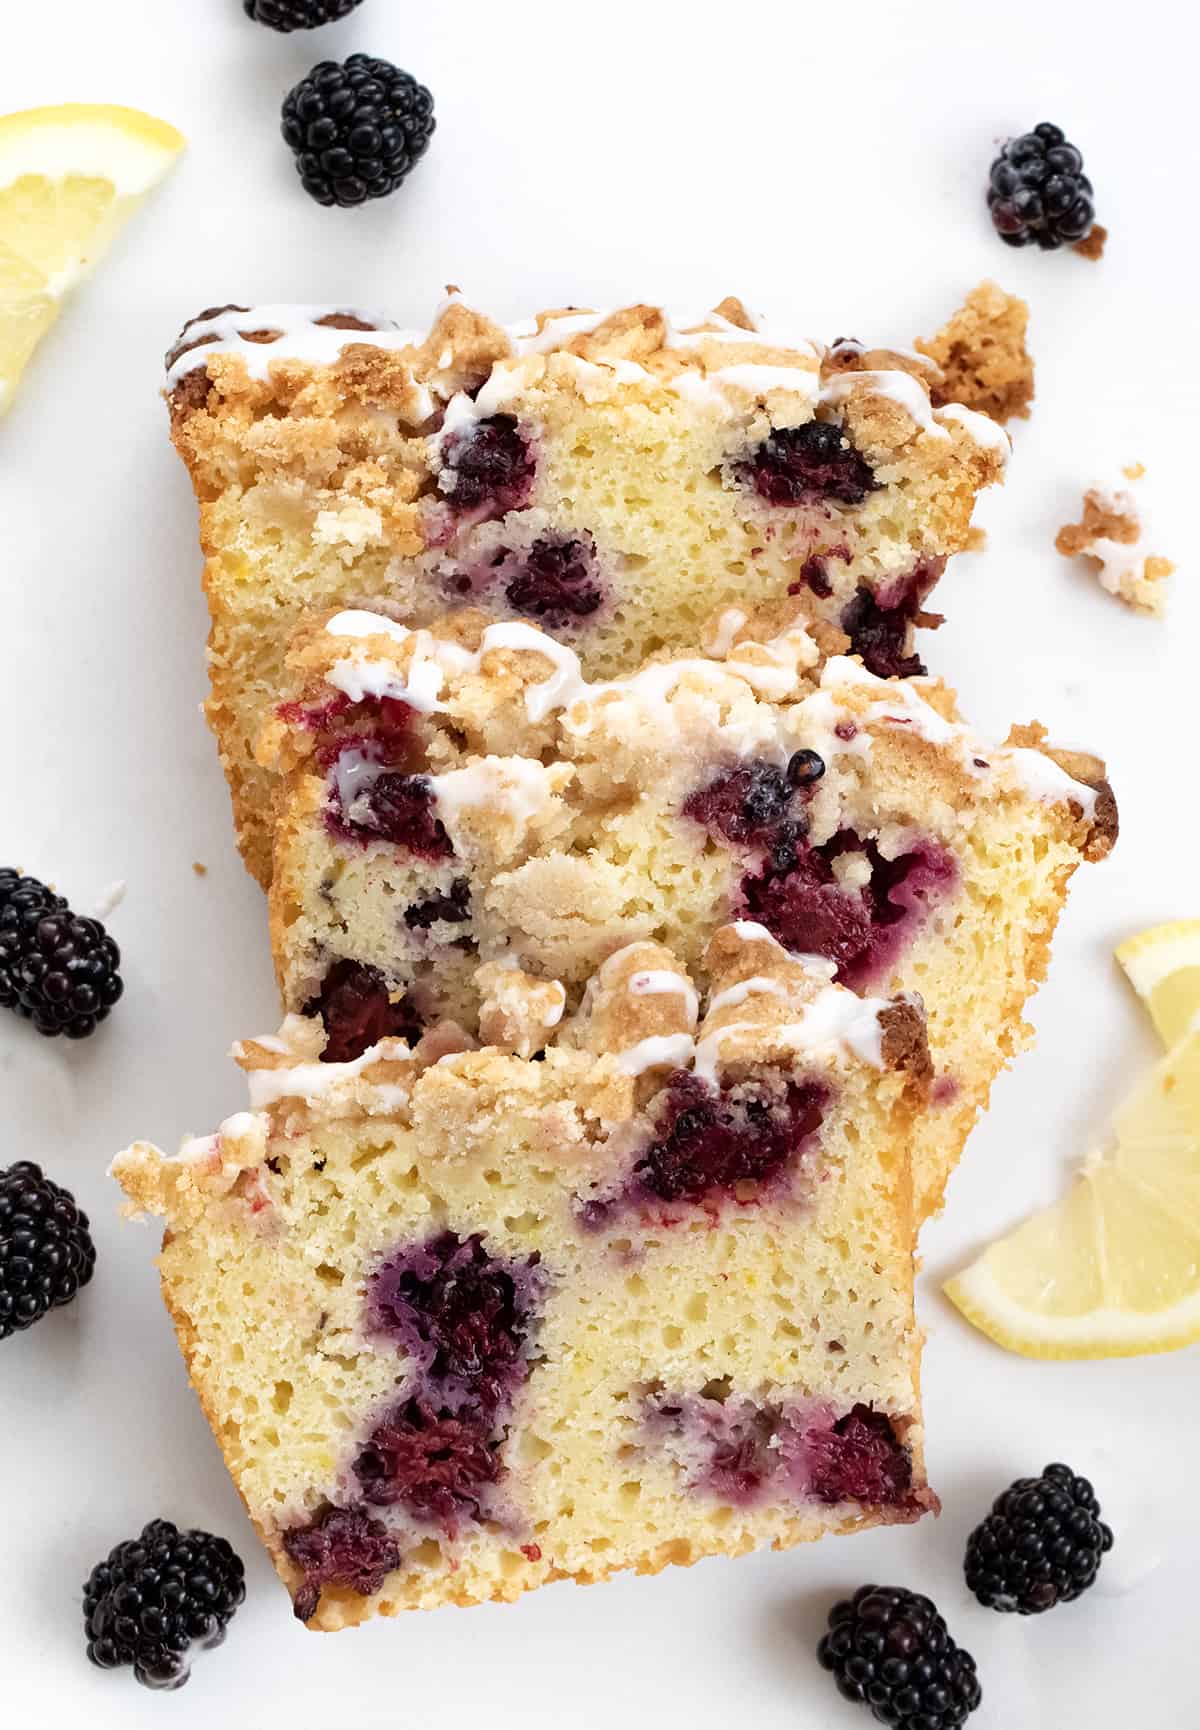 Pieces of Blackberry Lemon Loaf on a White Counter.